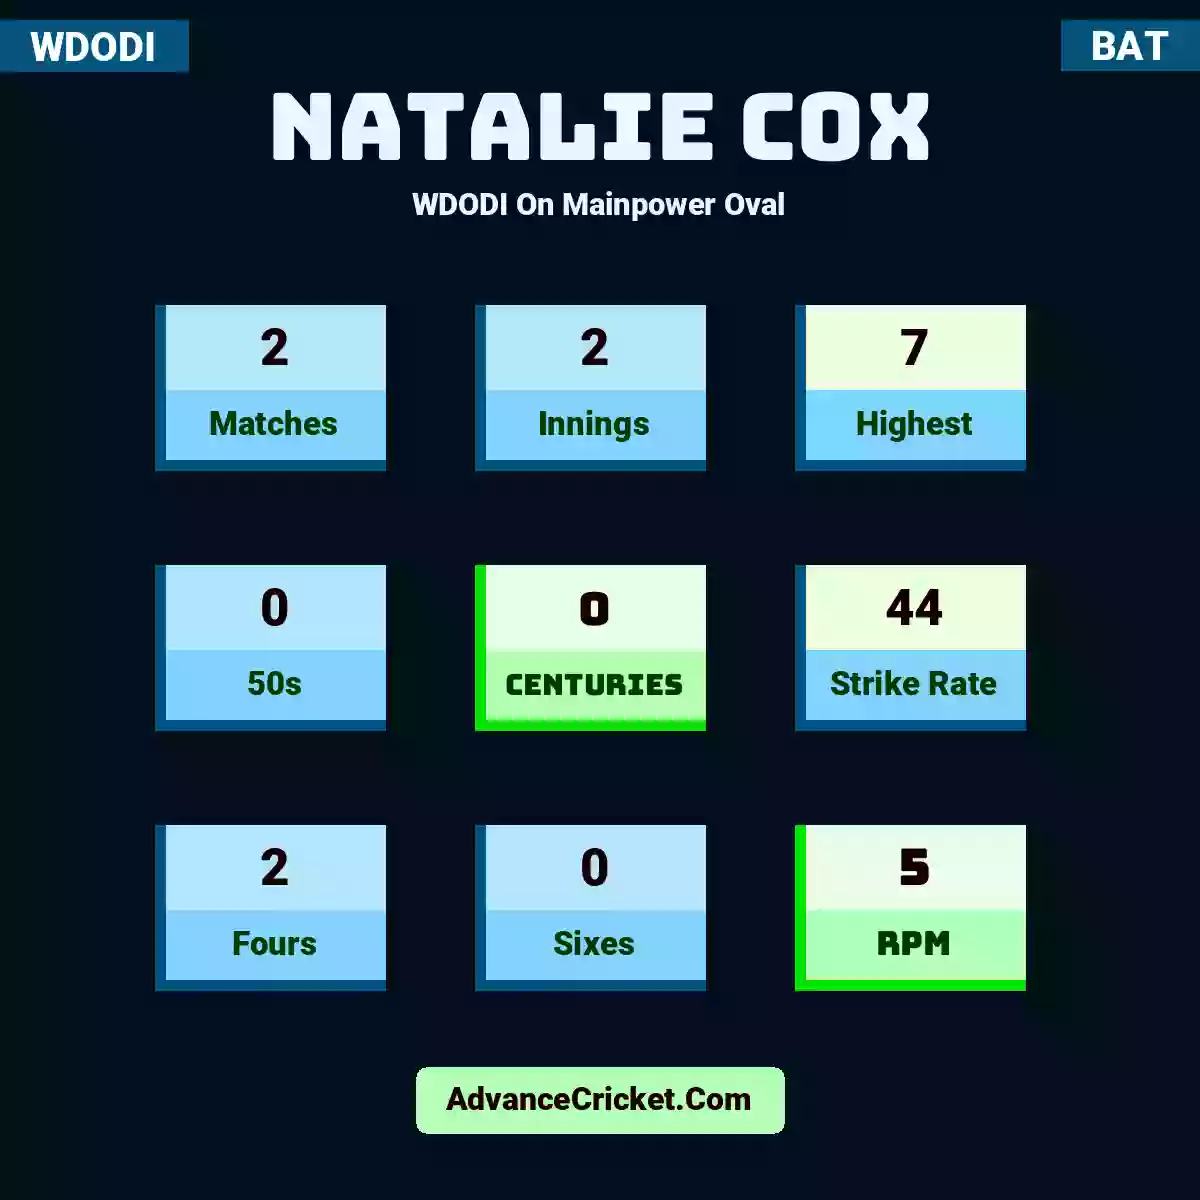 Natalie Cox WDODI  On Mainpower Oval, Natalie Cox played 2 matches, scored 7 runs as highest, 0 half-centuries, and 0 centuries, with a strike rate of 44. N.Cox hit 2 fours and 0 sixes, with an RPM of 5.